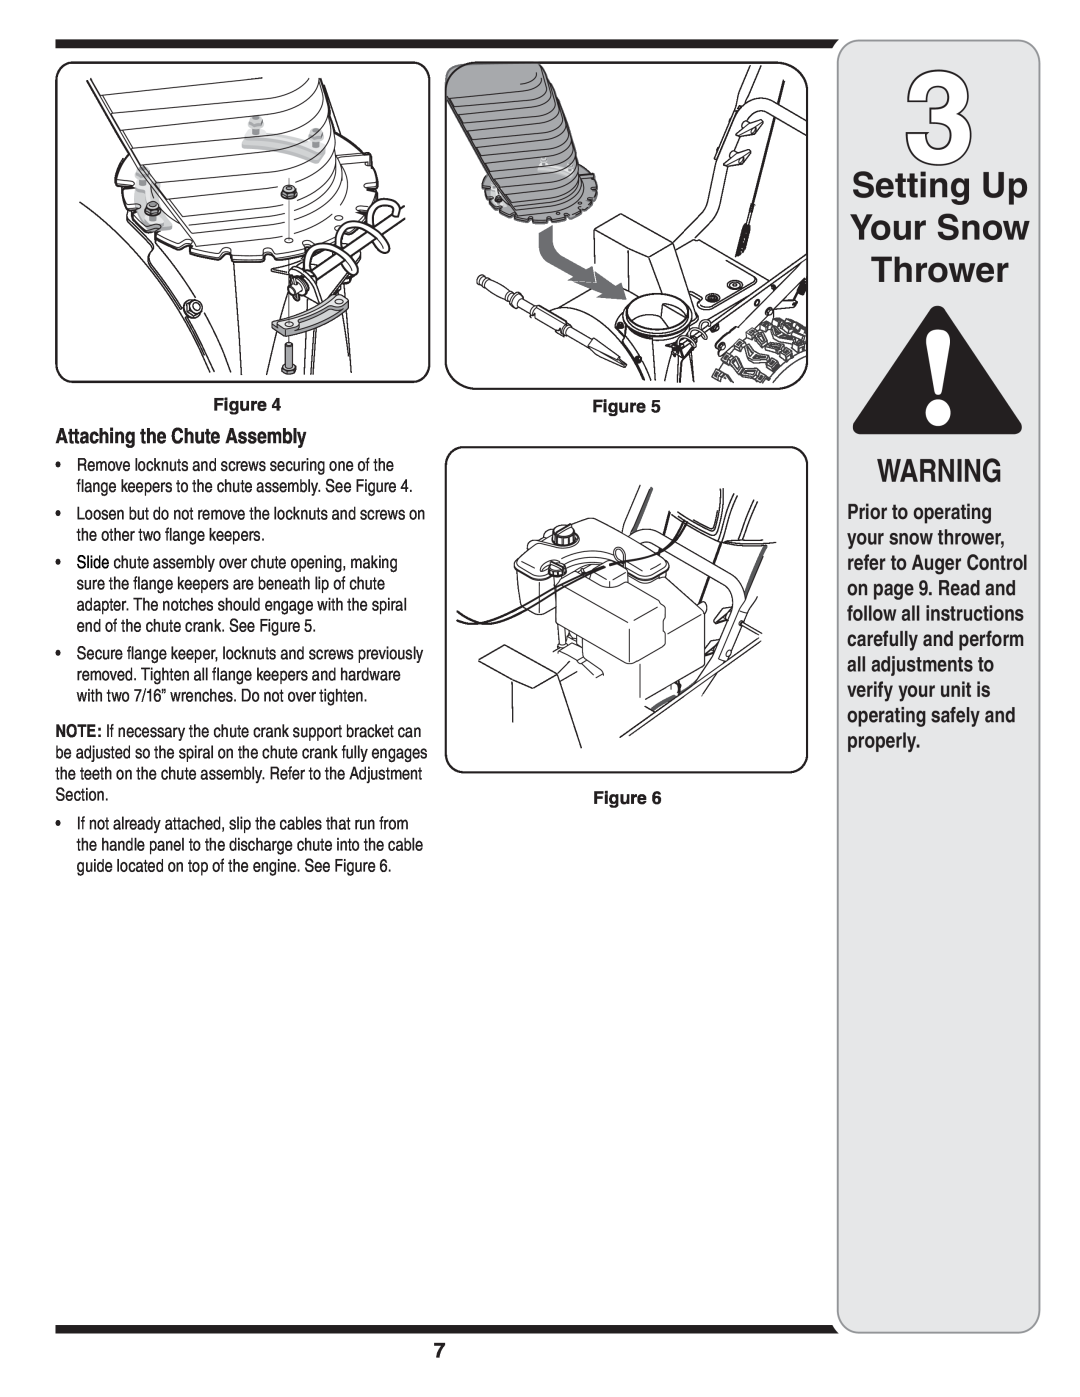 MTD 769-03247 warranty Setting Up Your Snow Thrower, Attaching the Chute Assembly 